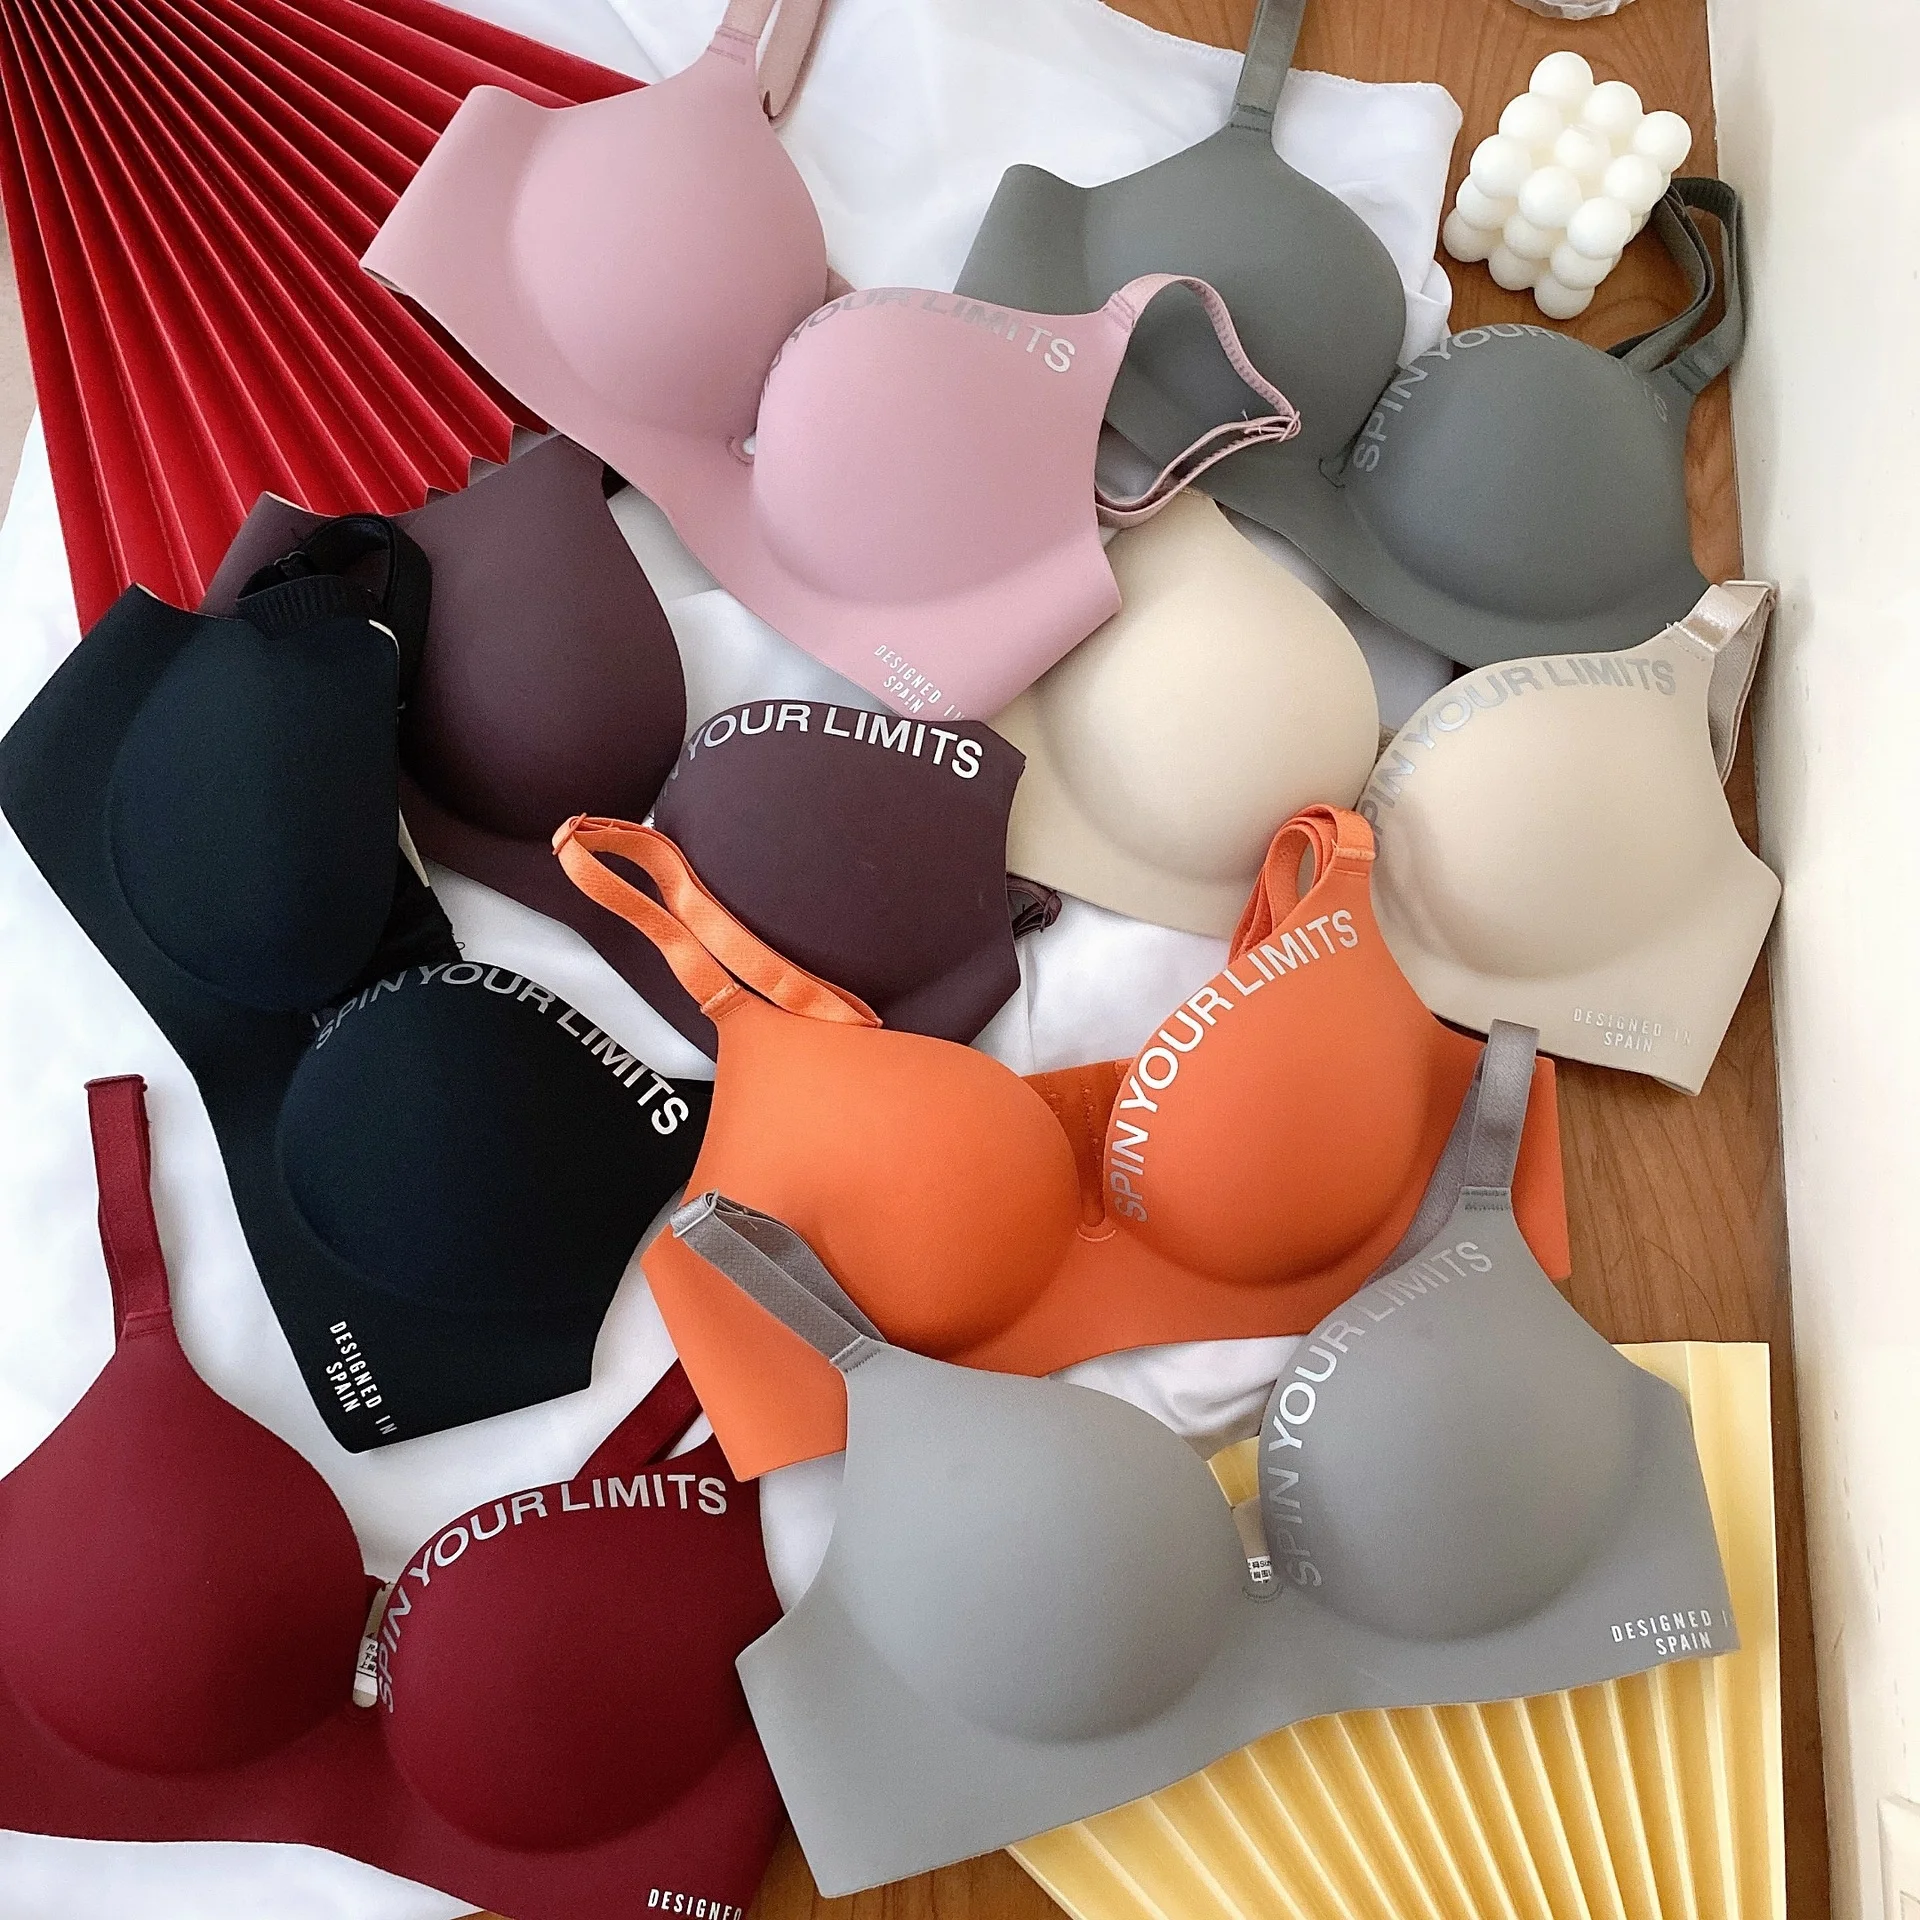 

One-piece lingerie small breasts gathered Thin Cup without a trace explosive style British Alphabet bra women Sexy Bralette, Pink, red, gray, black, dark skin, watermelon red, green, bean sand